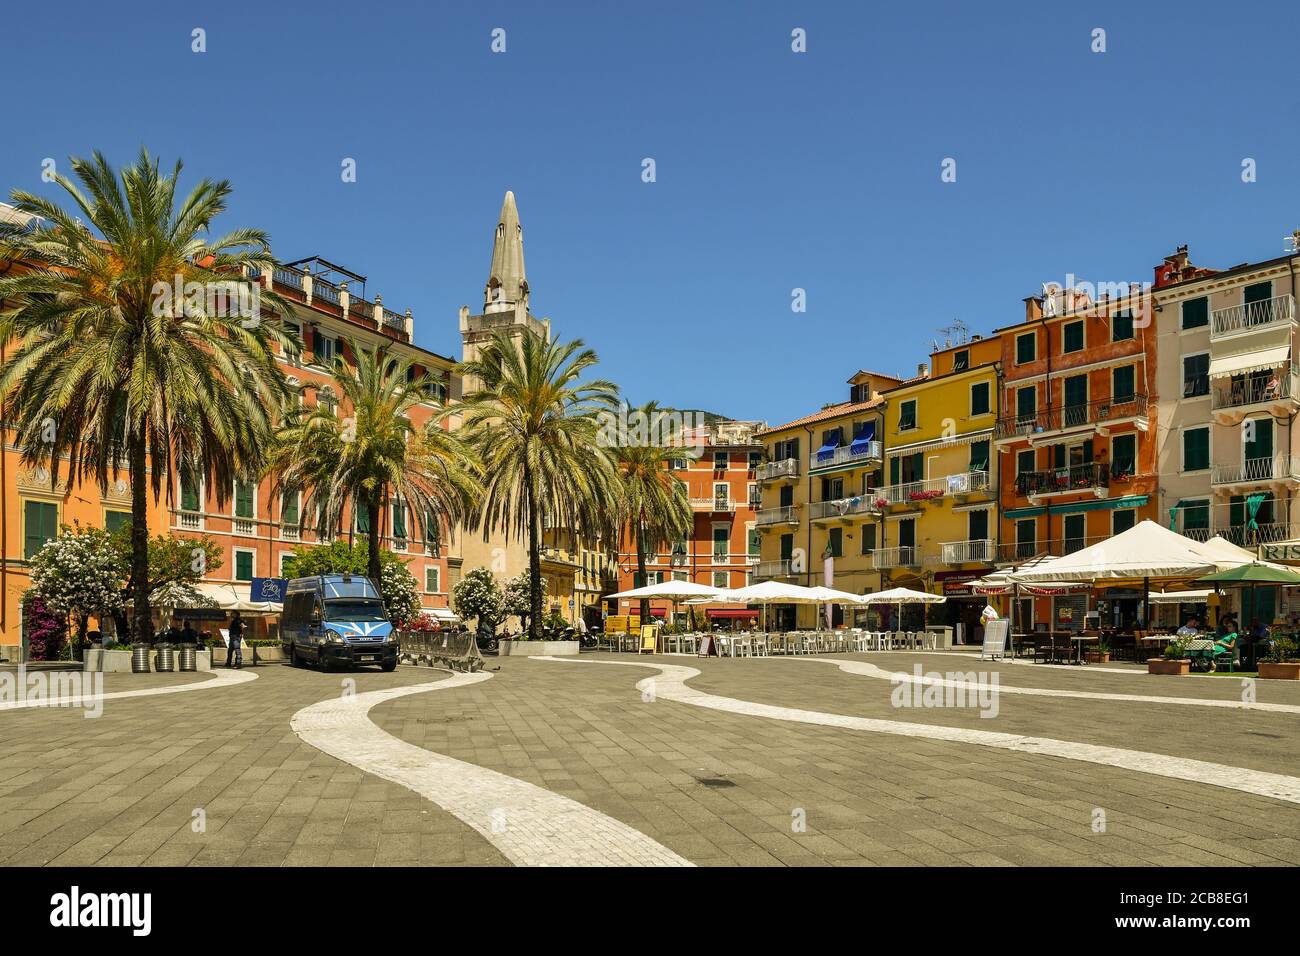 View of the main square with a police van for the protection of the Italian politician Matteo Salvini visiting the old sea town, Lerici, Italy Stock Photo